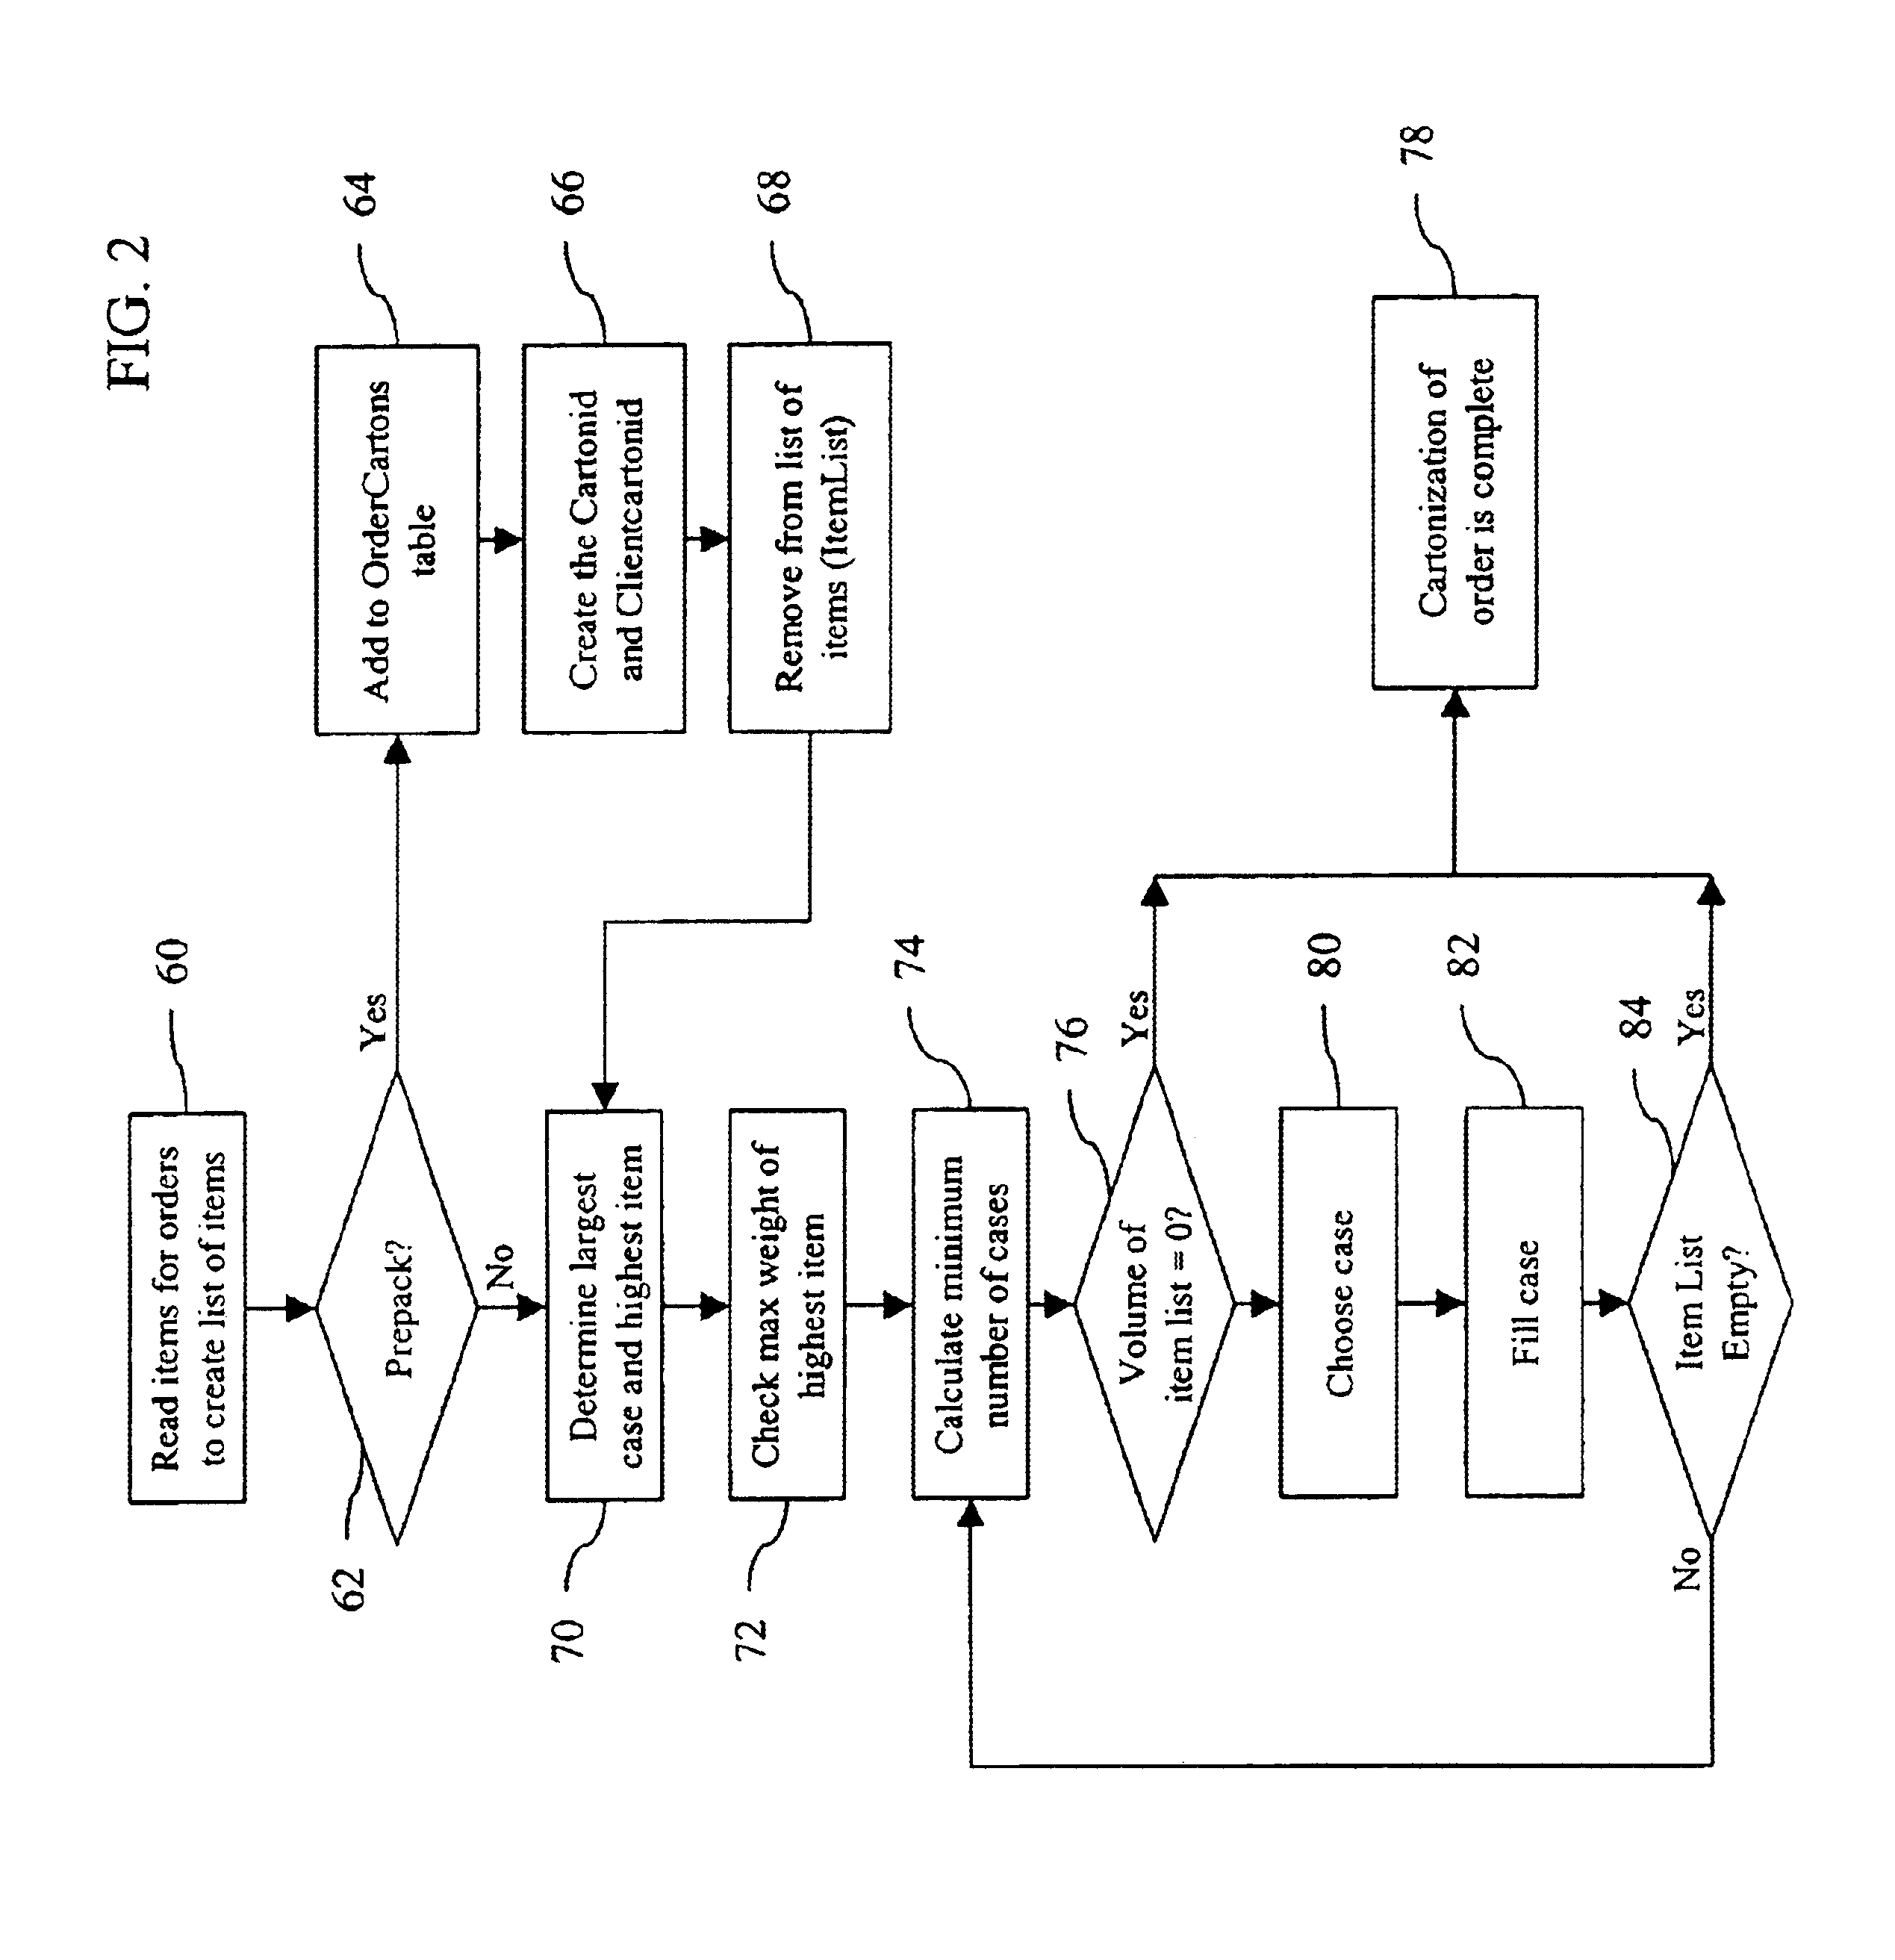 Method and system of optimized sequencing and configuring of items for packing in a bounded region